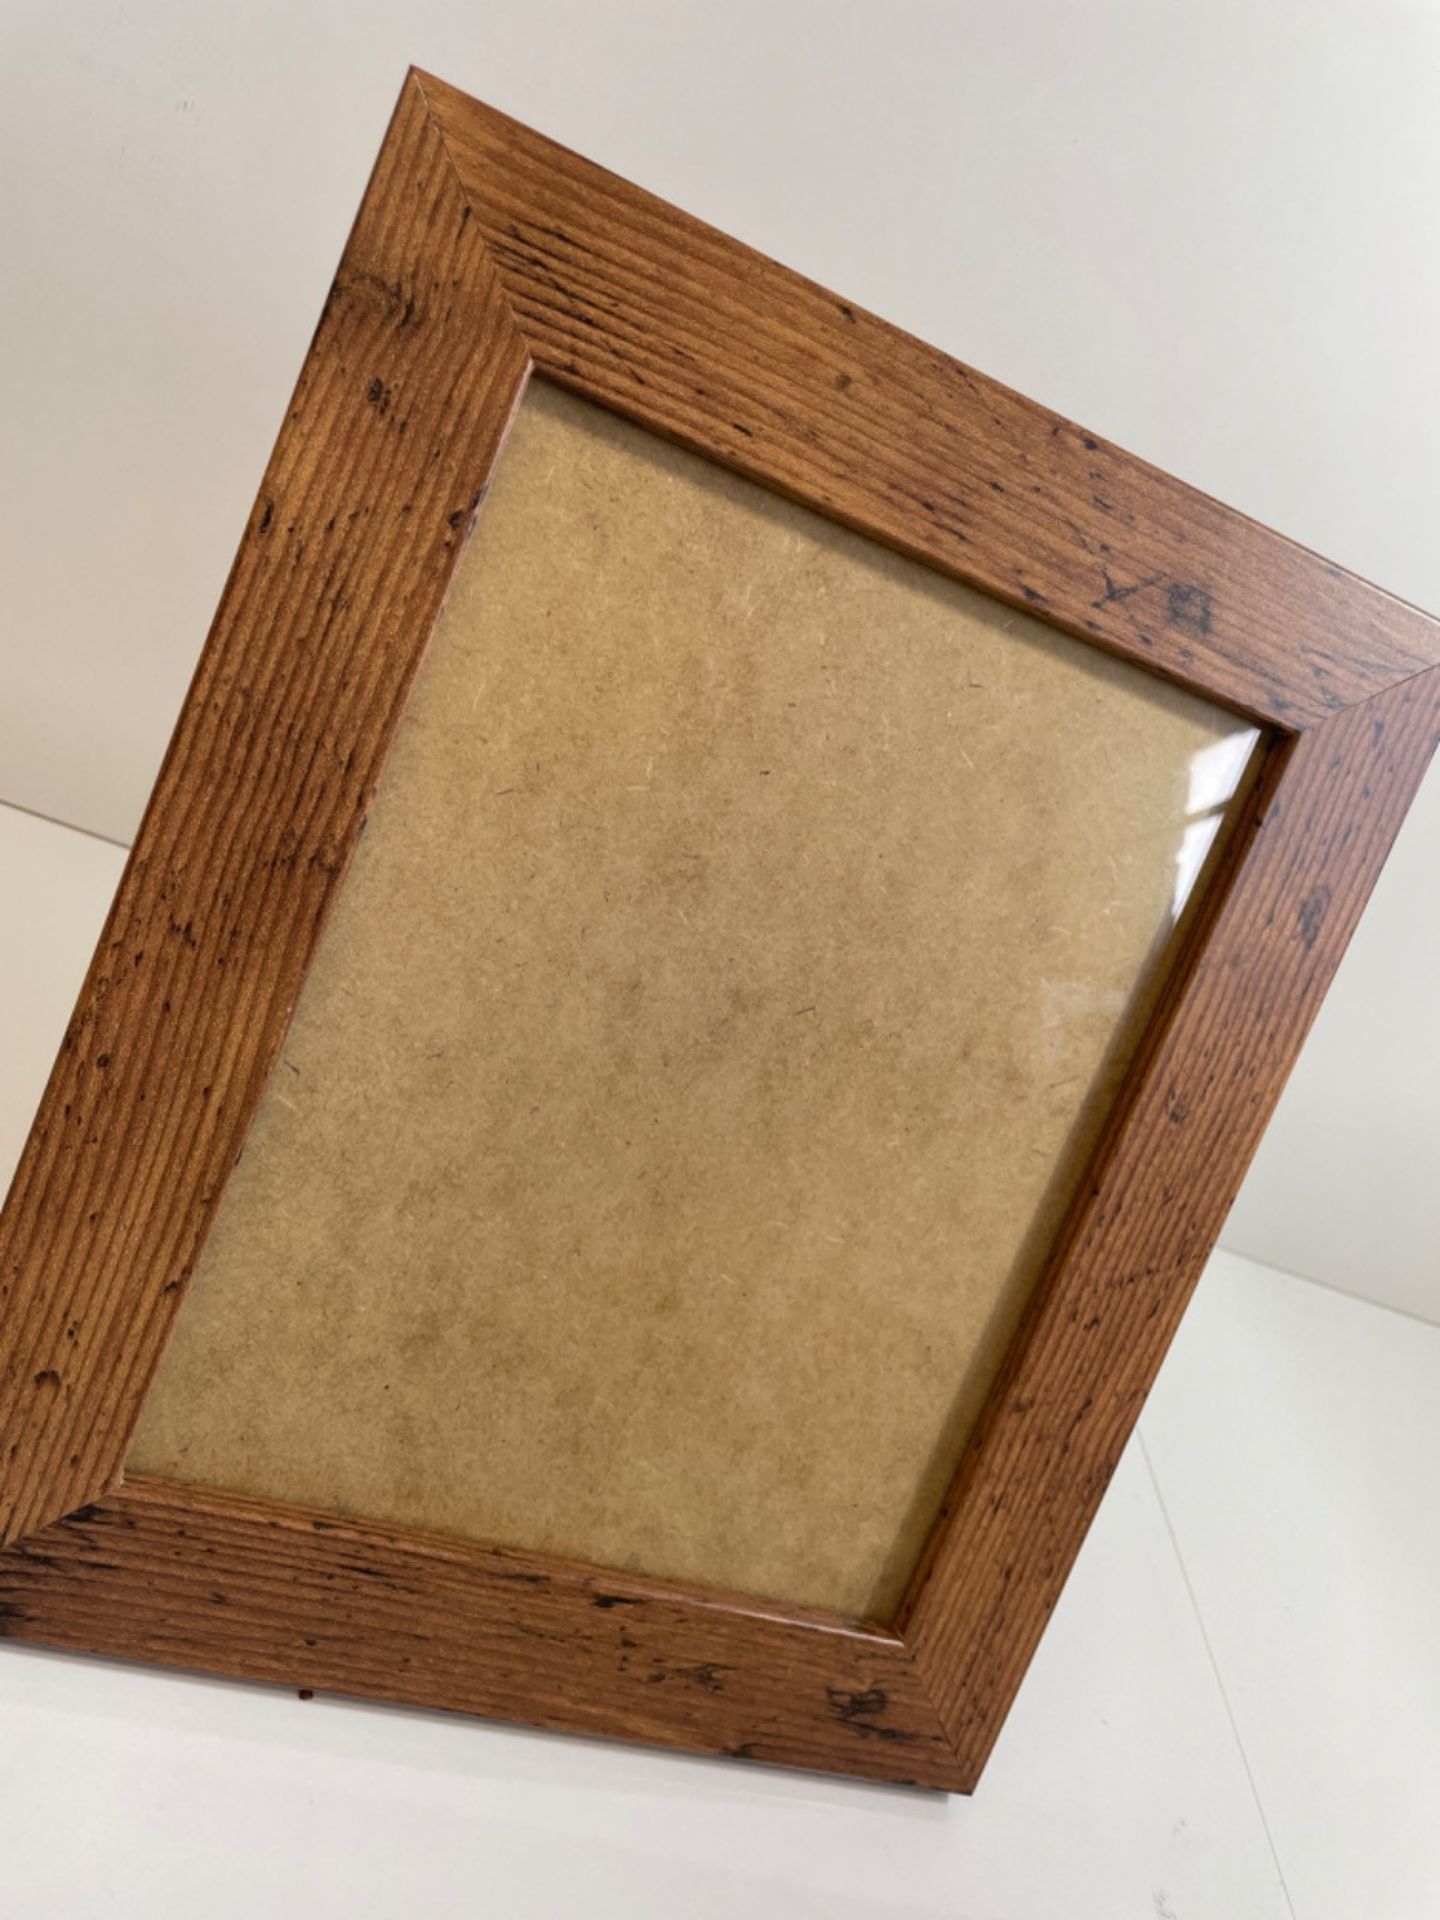 Frame Company Watson Range Rustic 10x8 inch Picture Photo Frame *Choice of Sizes* - Image 2 of 3